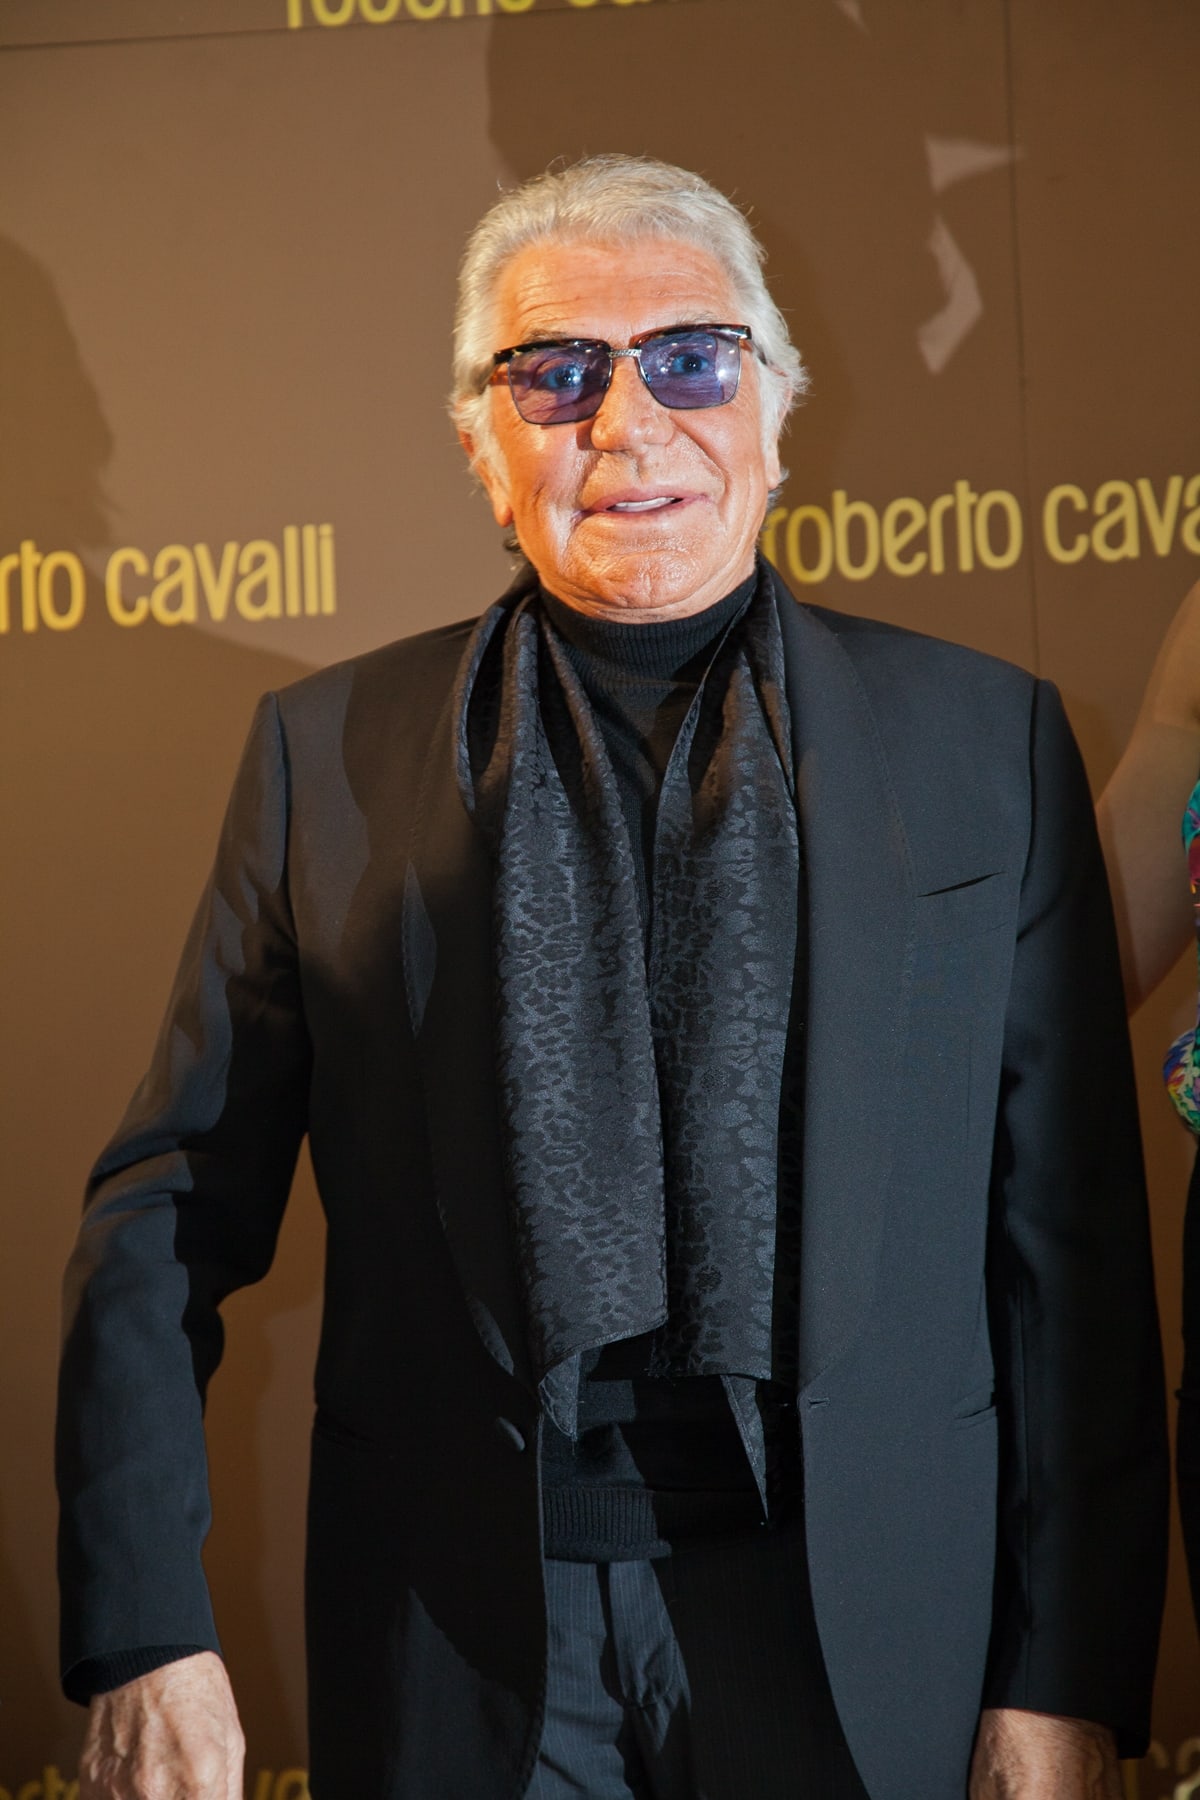 Roberto Cavalli is an Italian fashion designer and founder of the Roberto Cavalli brand, known for its bold and colorful prints, luxurious designs, and attention to detail